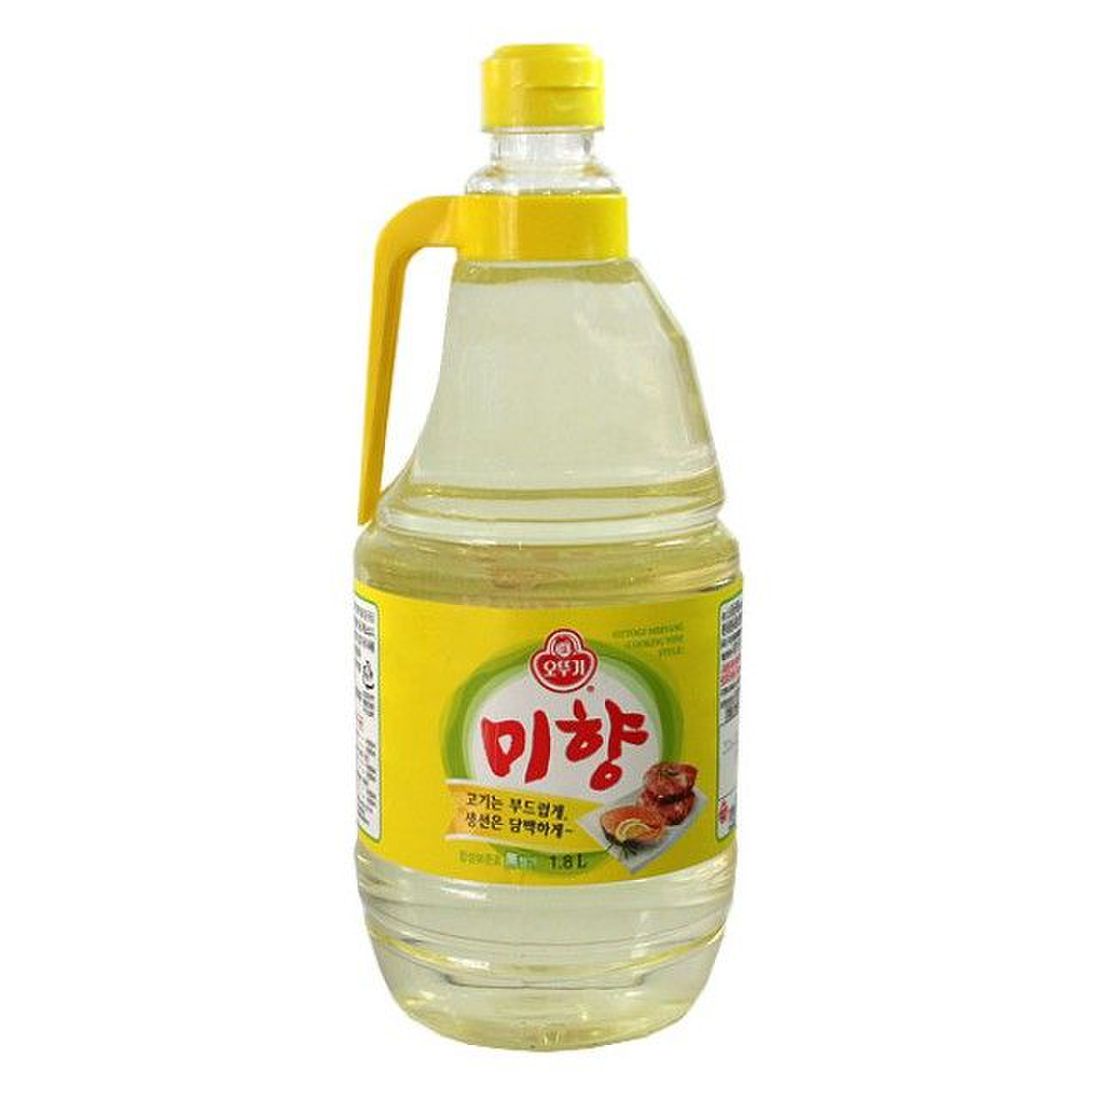 Ottogi  Mihyang Cooking wine 1.8l/오뚜기 미향 1.8l